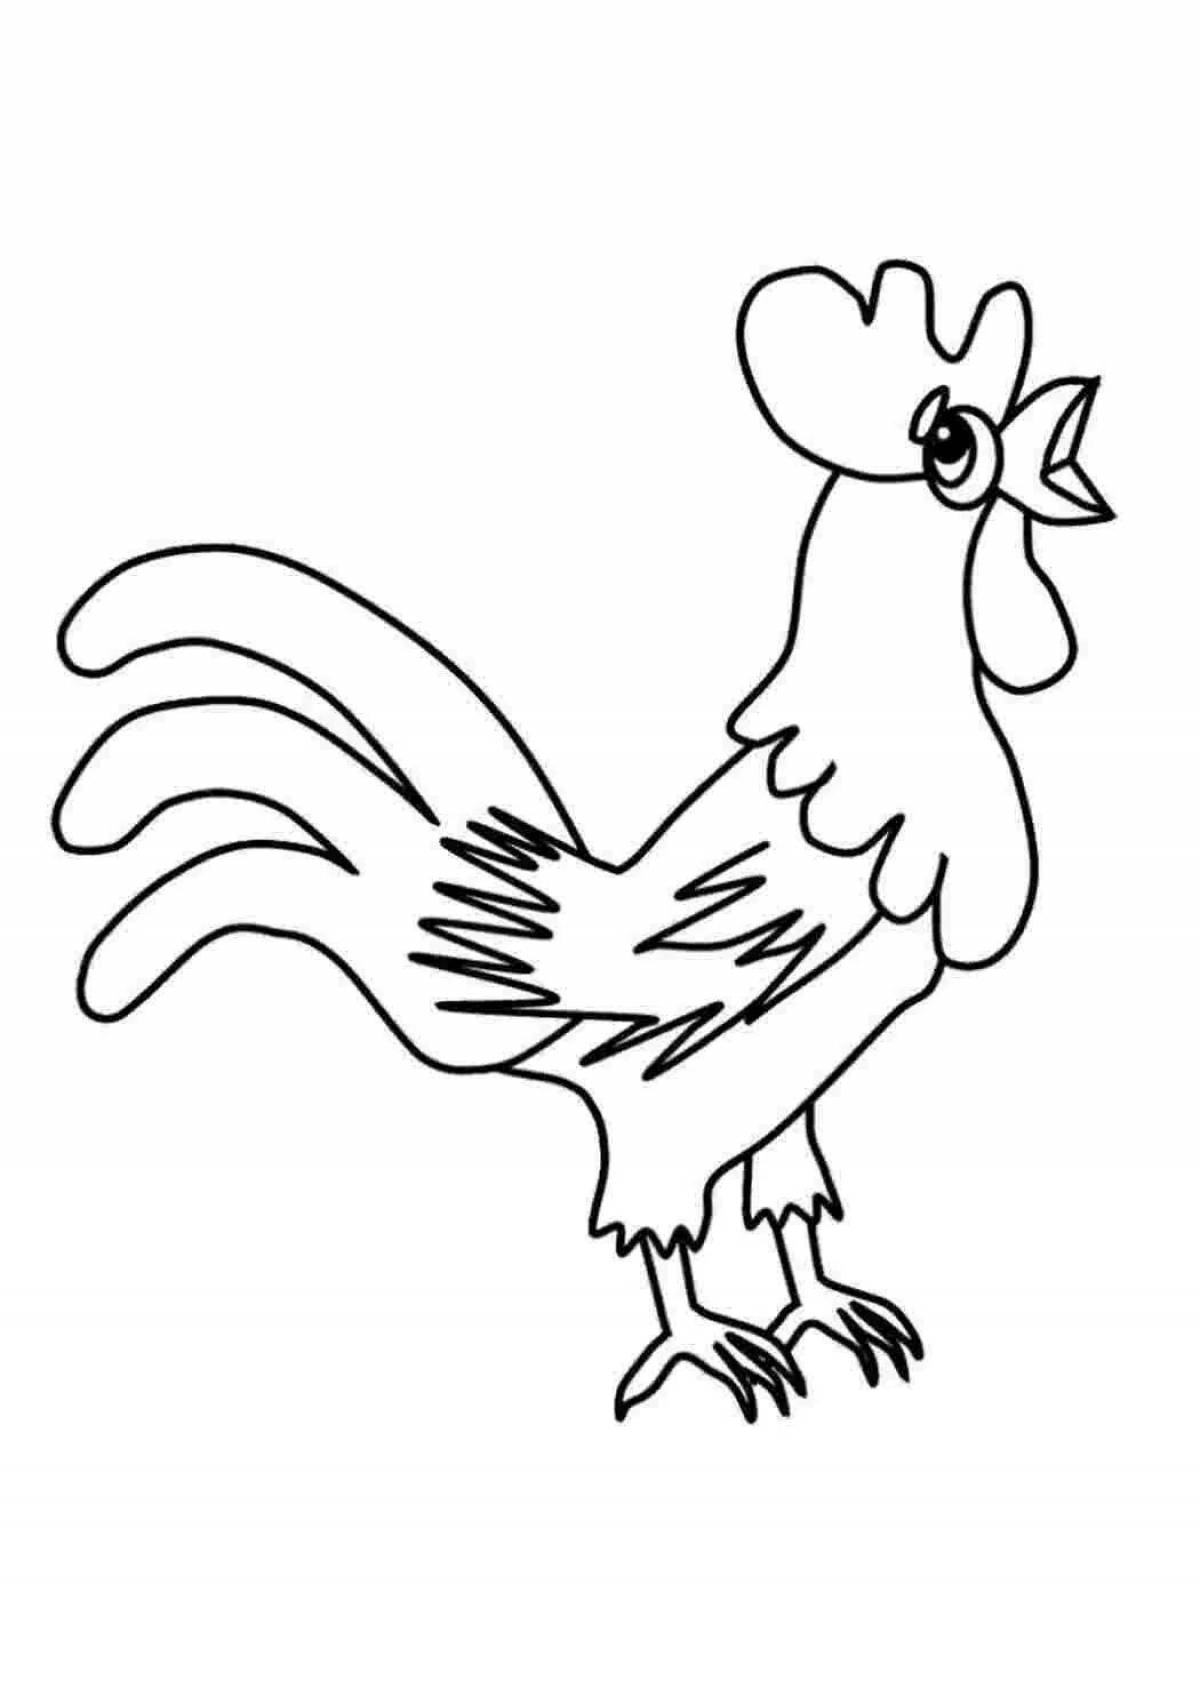 Creative rooster coloring for 6-7 year olds